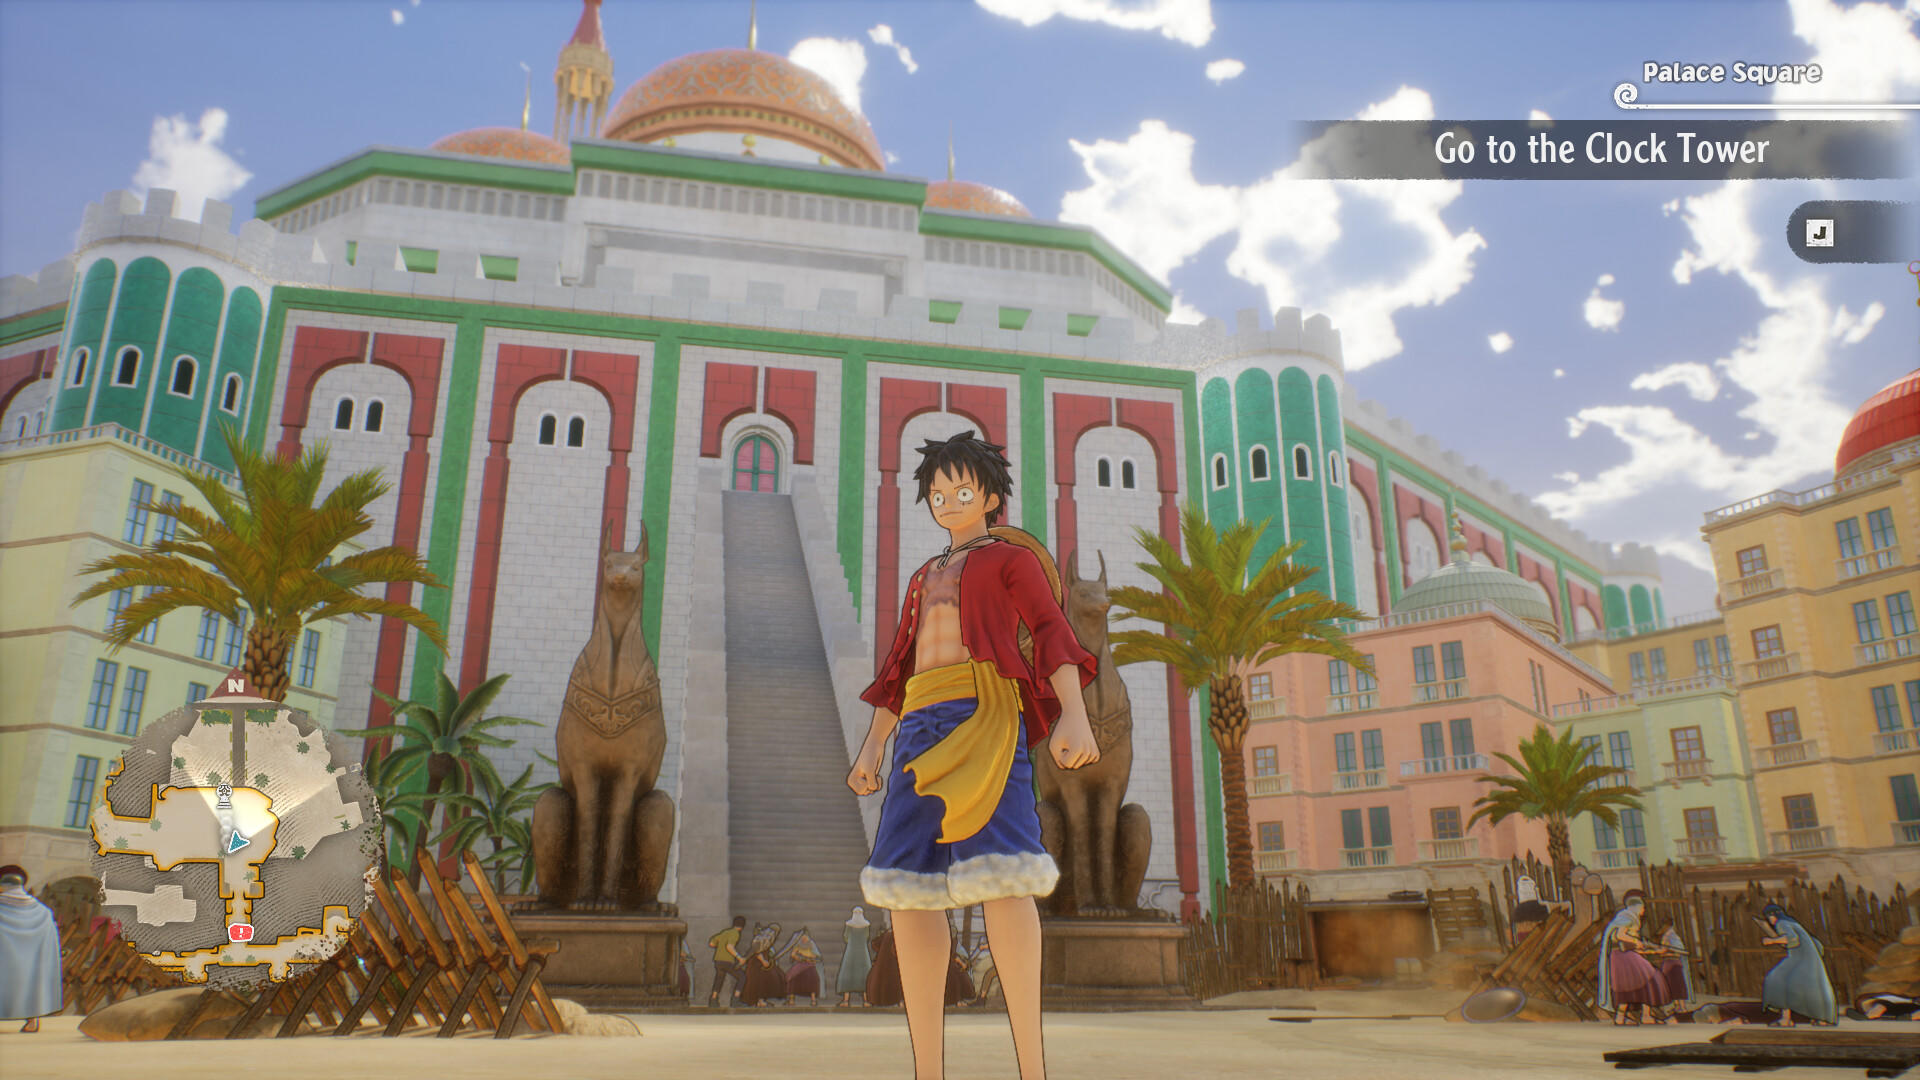 One Piece Online - MMO Square